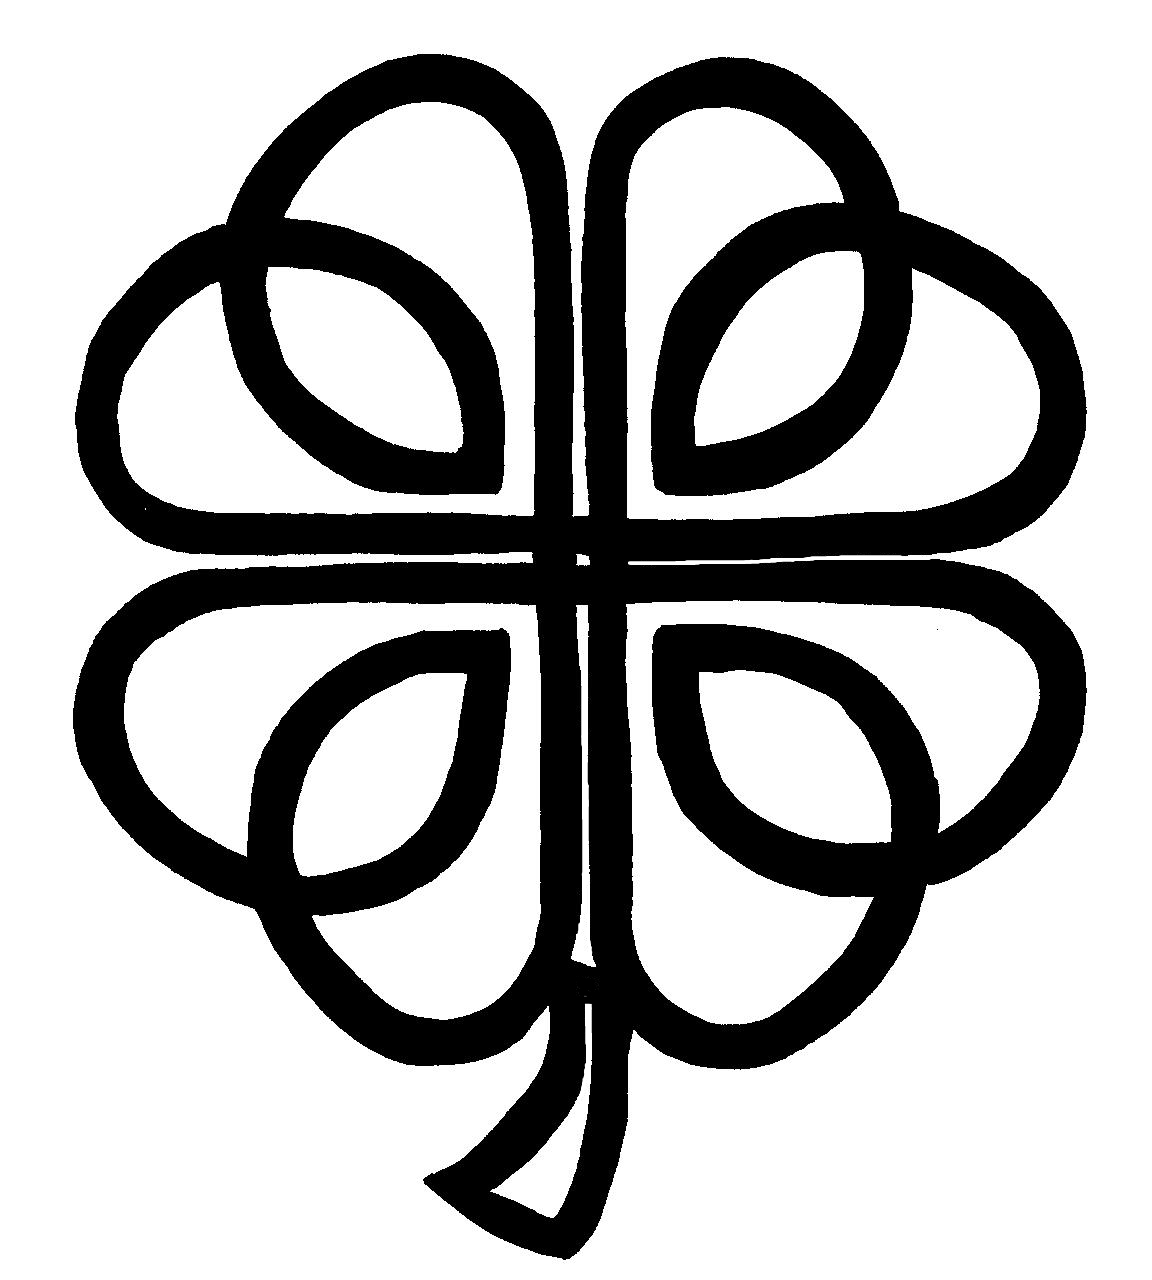 Celtic_Clover_by_linuxchic.png